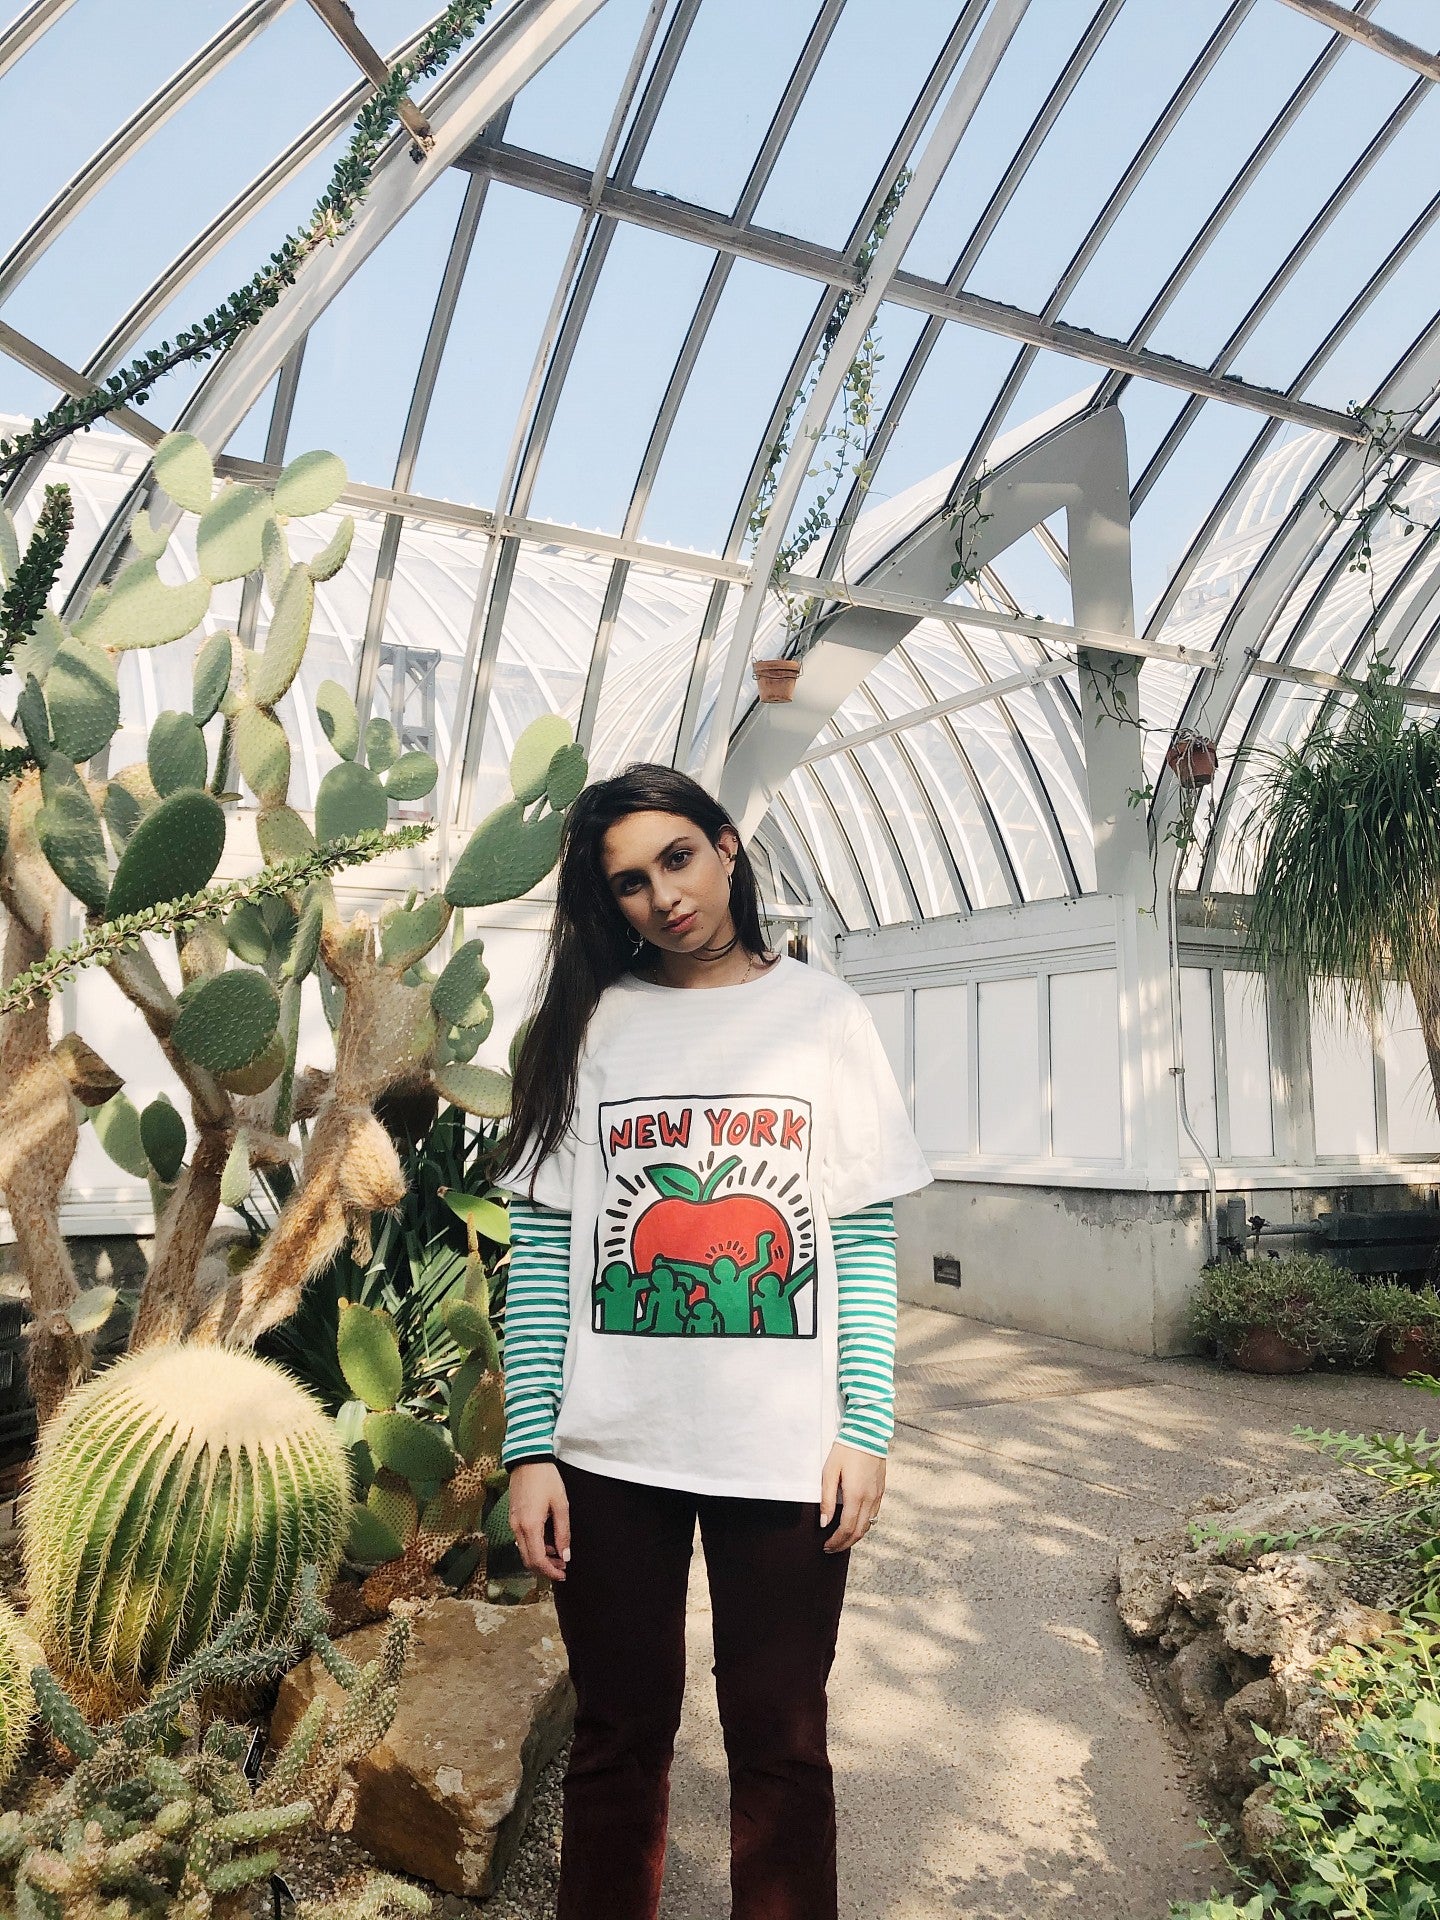 Zaria Parvez strikes a pose in a large greenhouse.